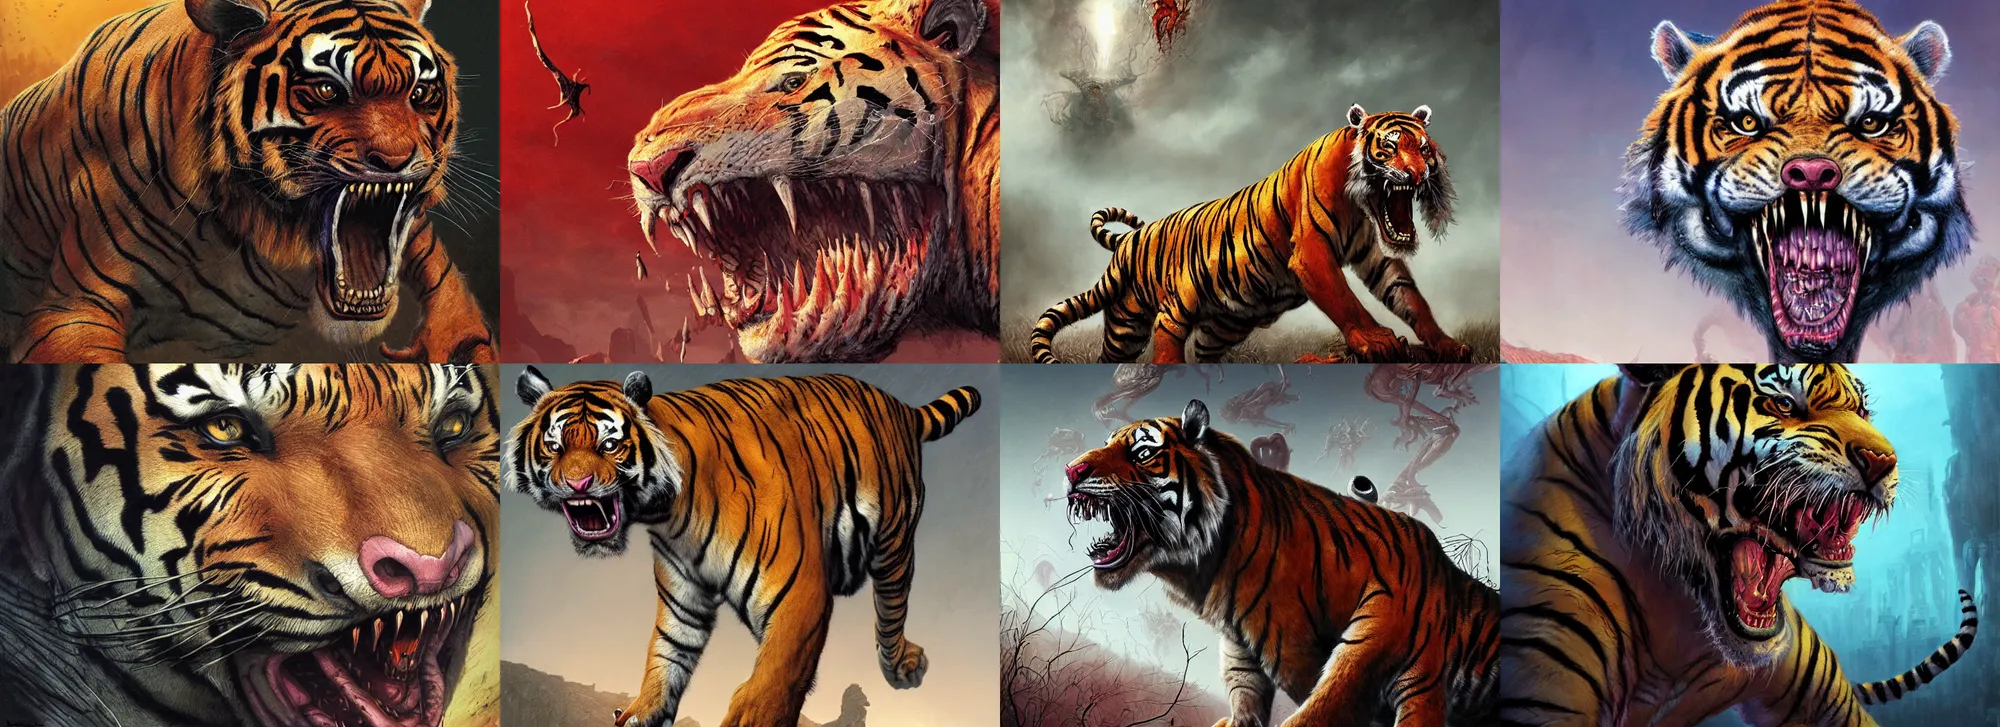 Prompt: a nightmarish mutated tiger, staring hungrily, by neville page and wayne barlowe, ( ( ( horror art ) ) ), wide angle, dramatic lighting, highly detailed digital painting